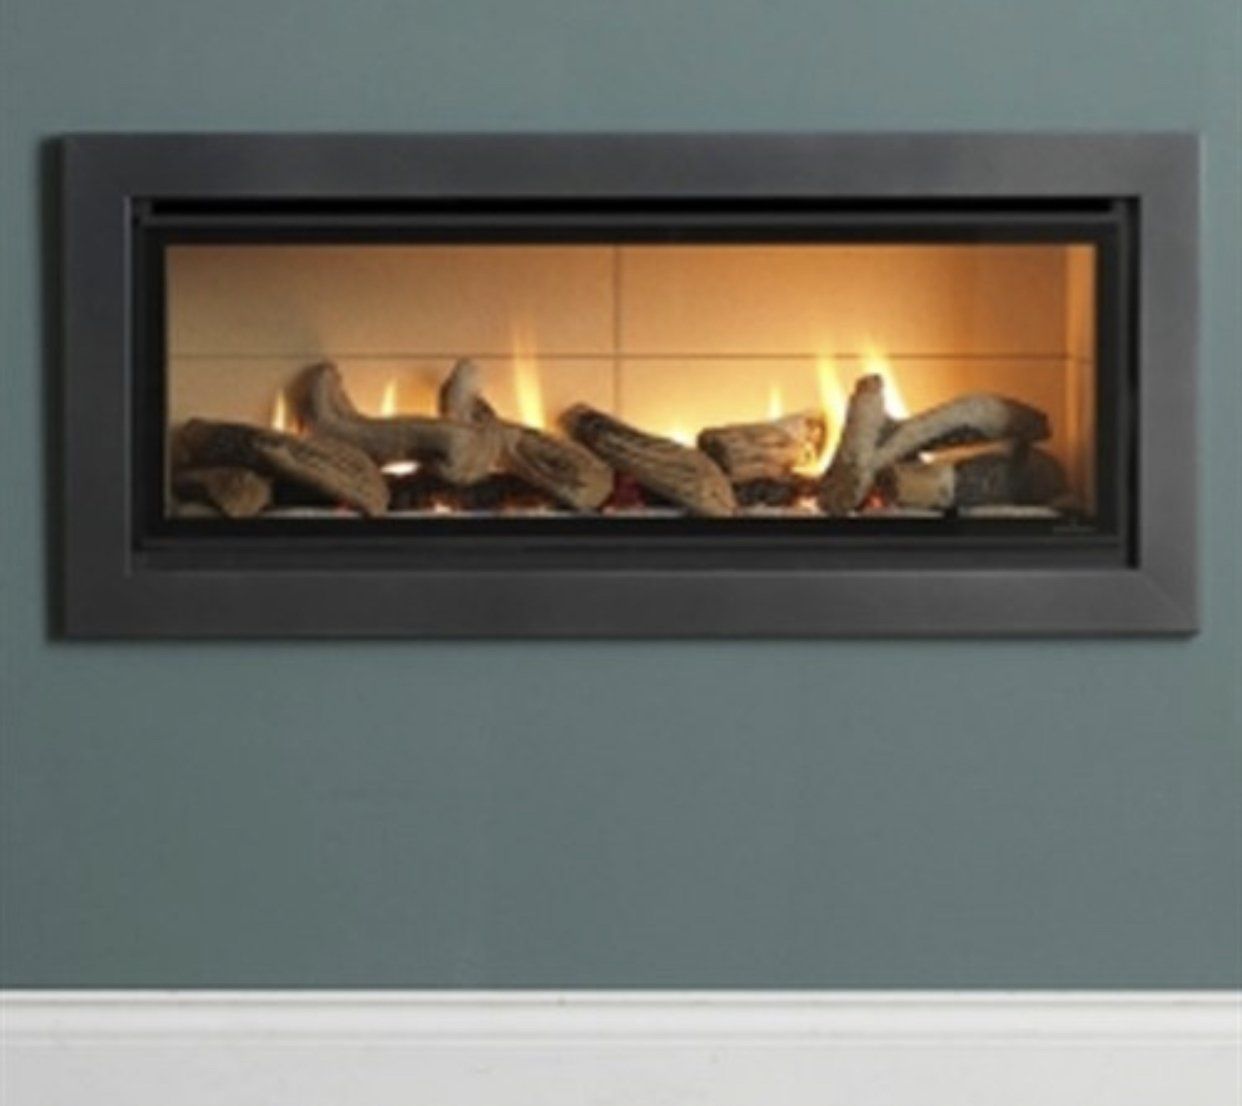 An array of fireplace accessories